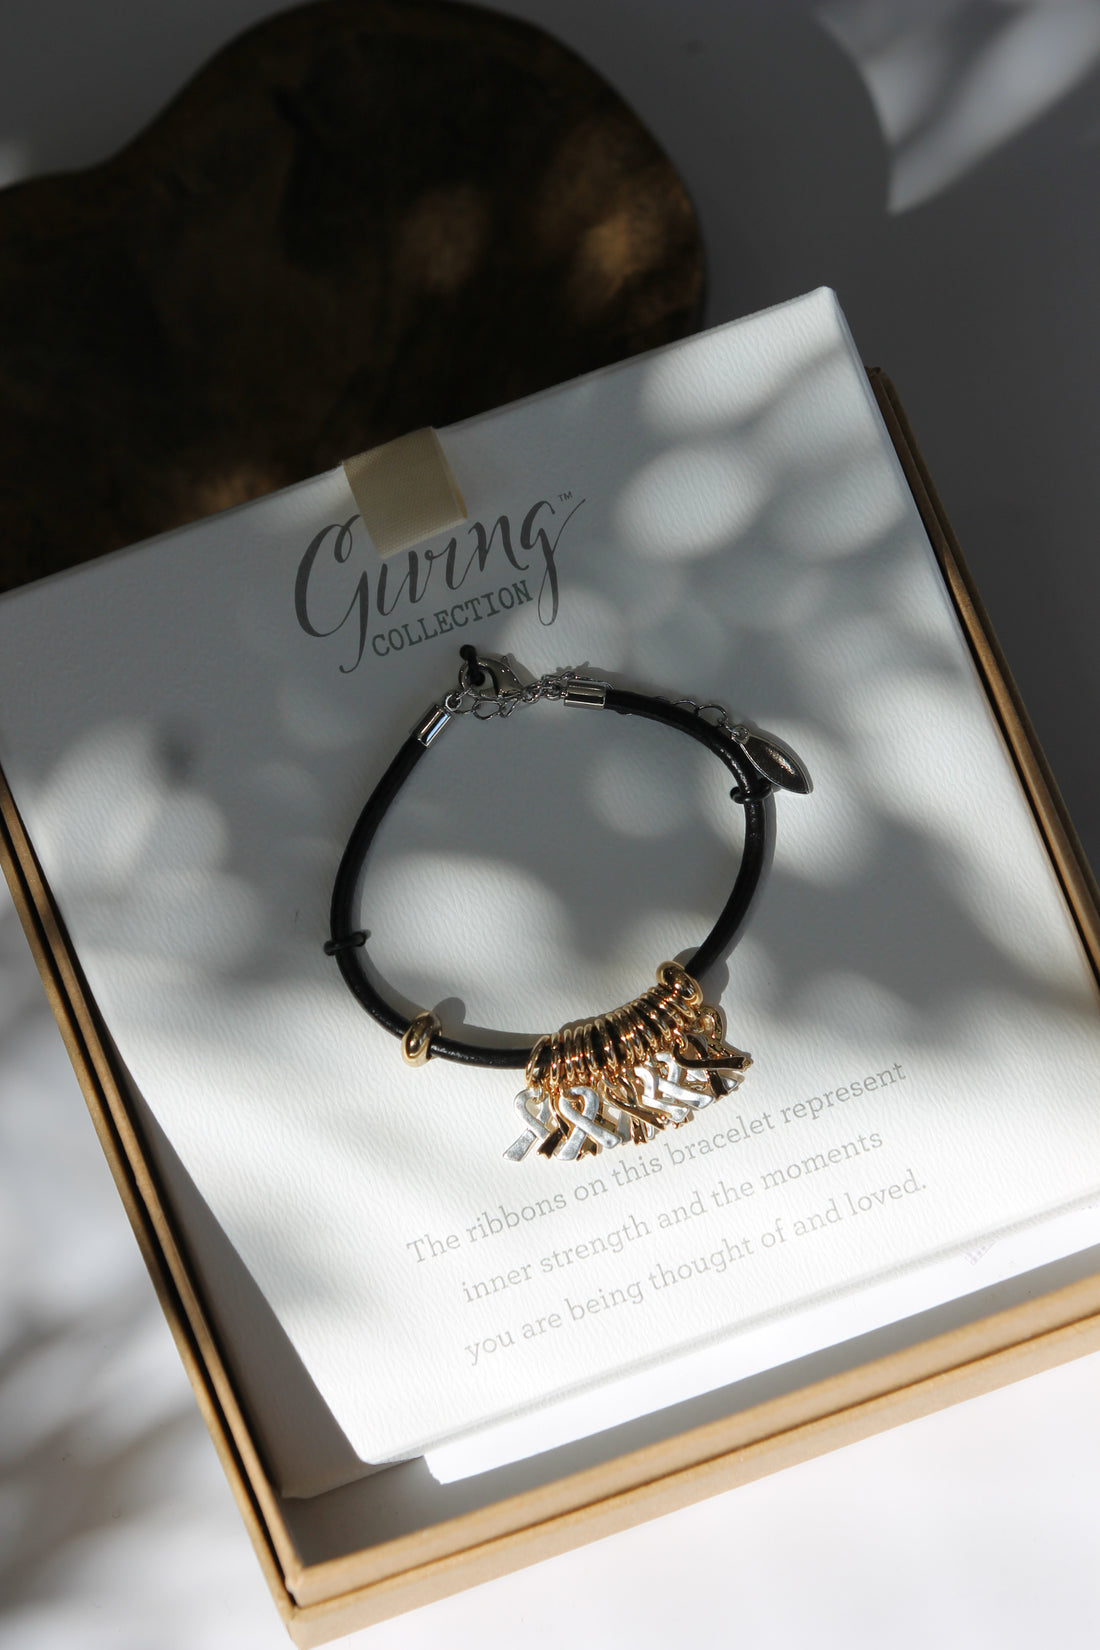 Cancer Ribbon Necklace – Hair With A Cause Oncology Boutique